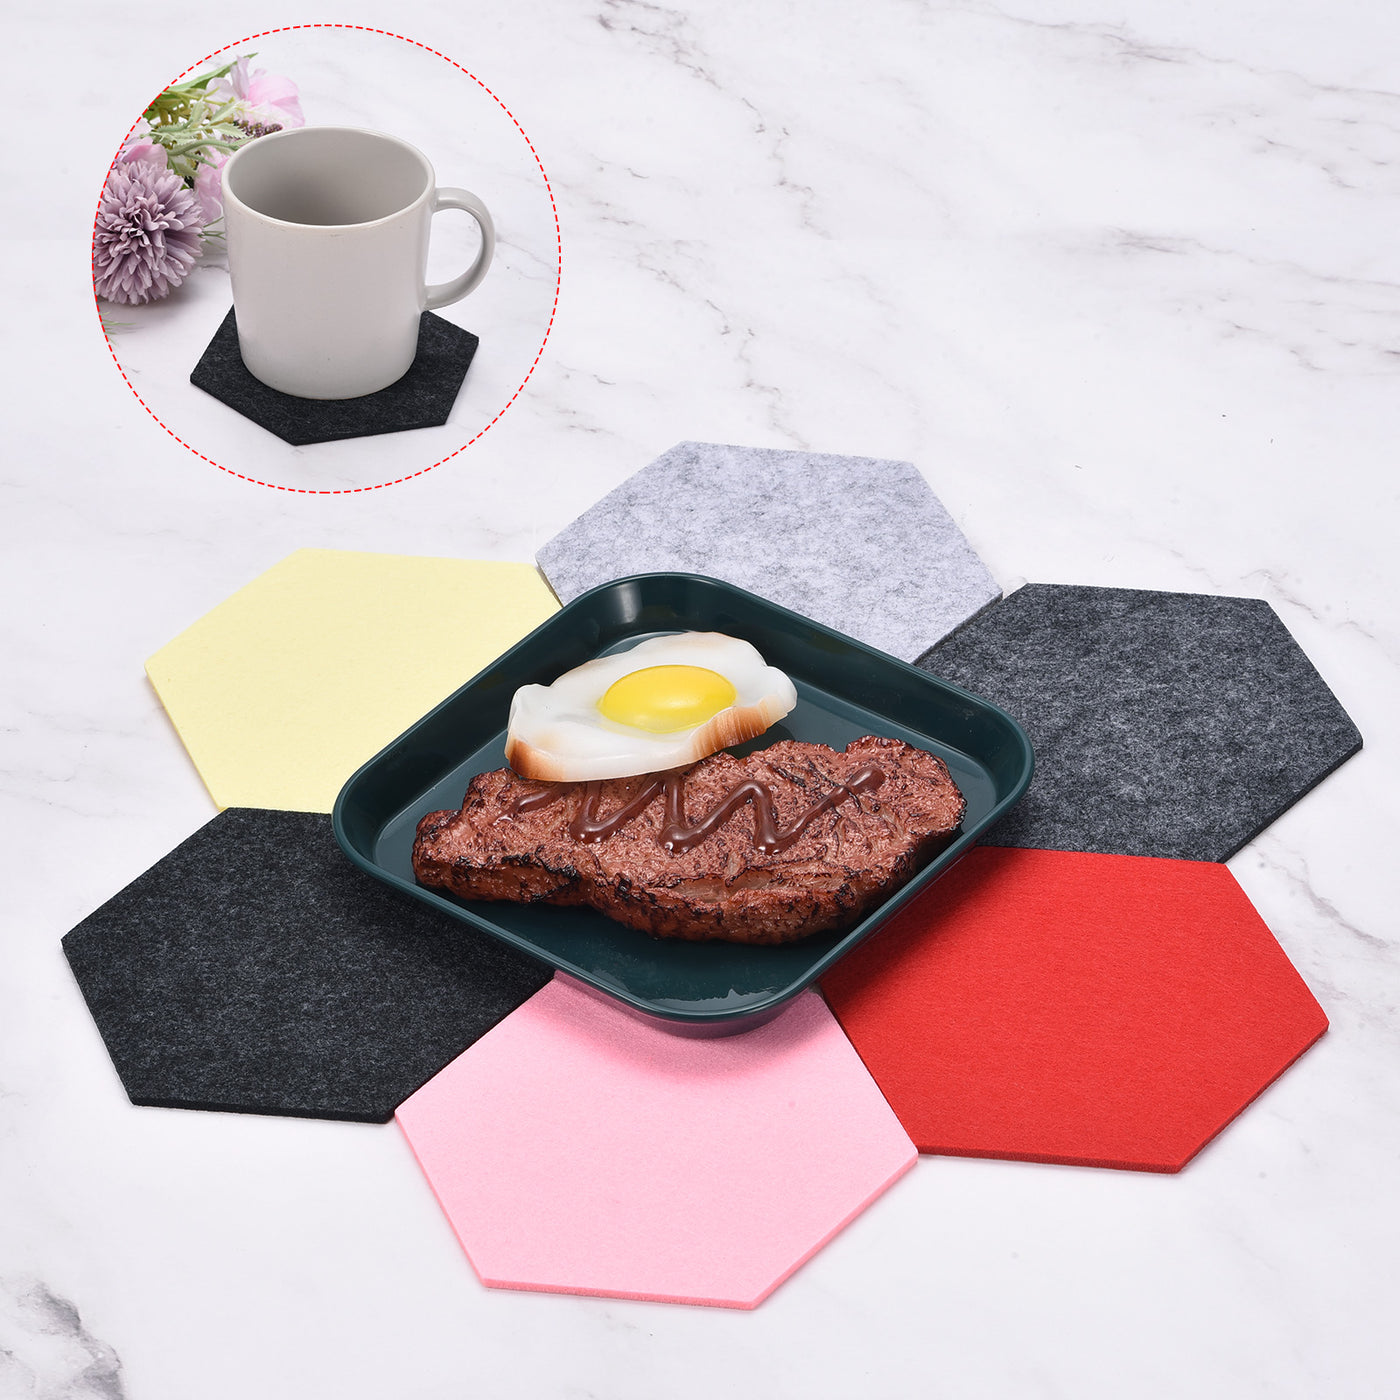 uxcell Uxcell Felt Coasters 9pcs Absorbent Pad Coaster for Drink Cup Pot Bowl Vase Black